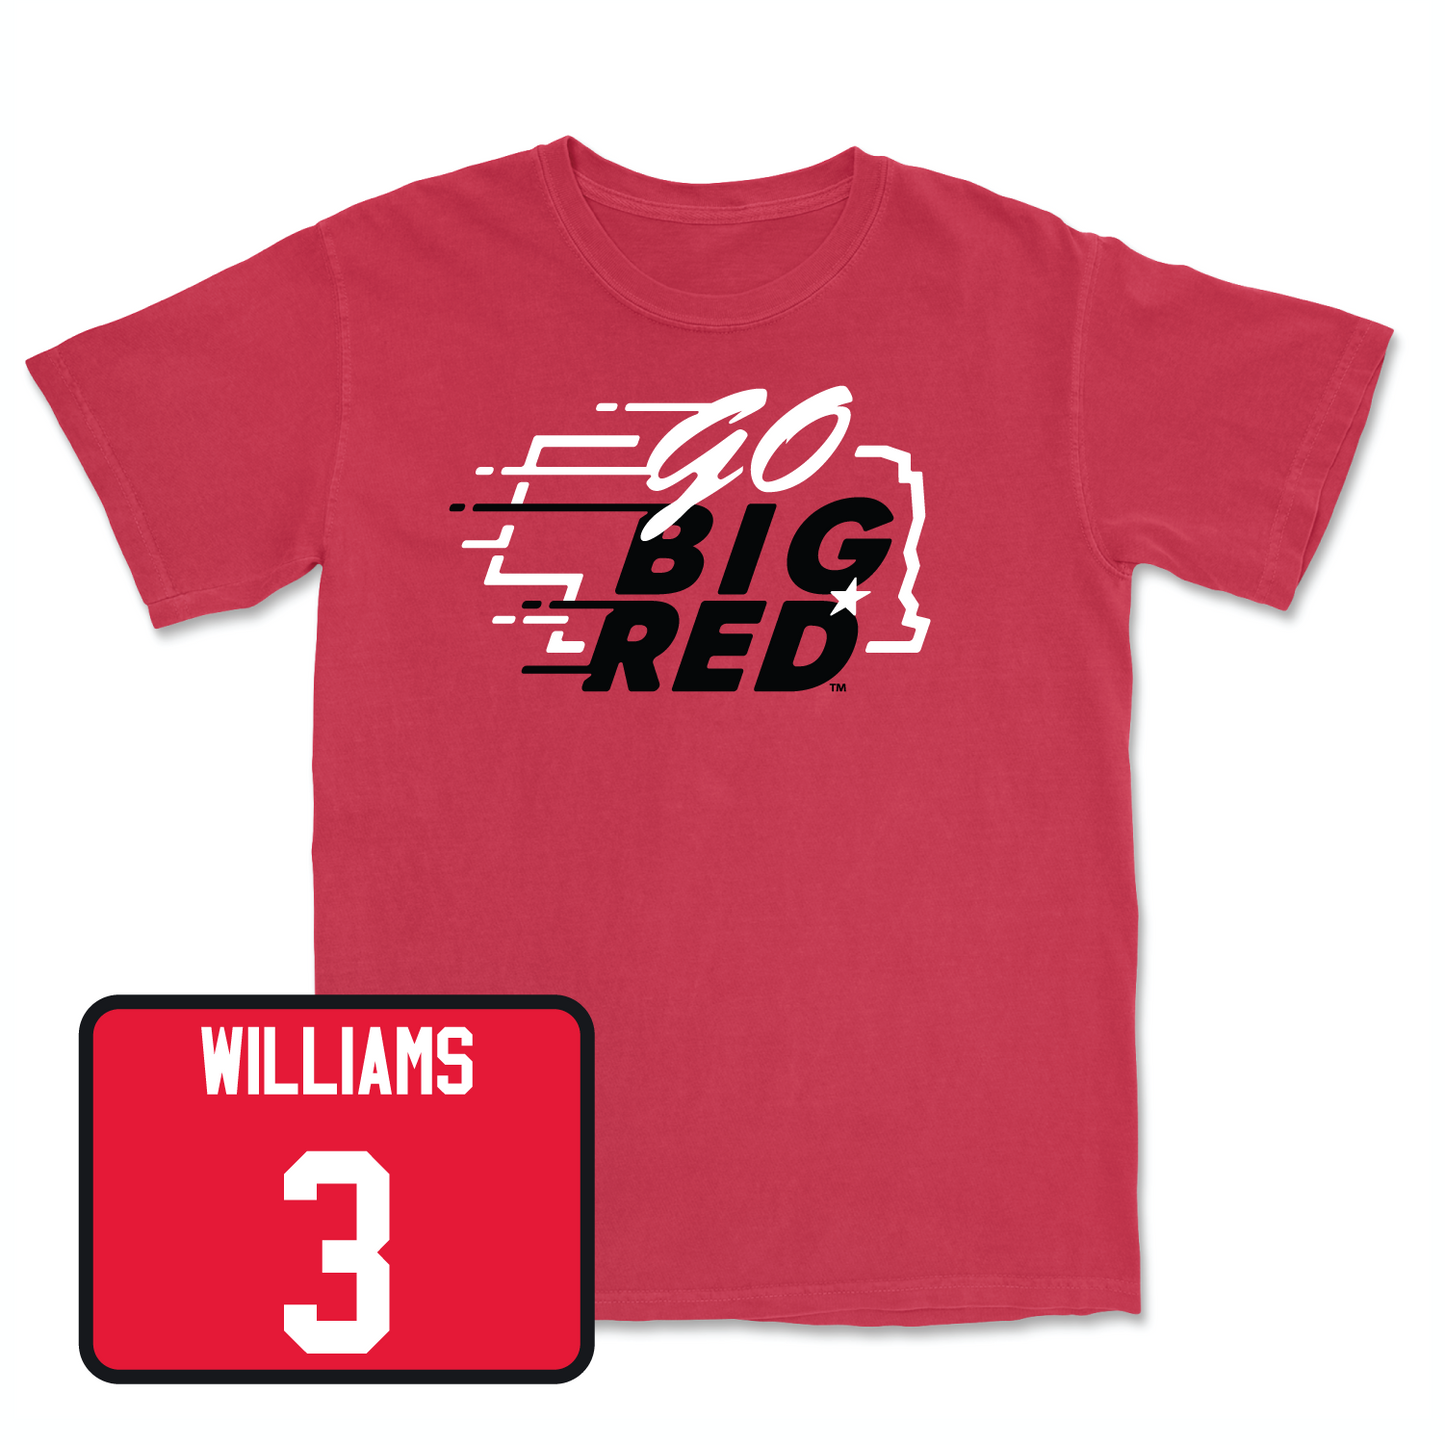 Red Men's Basketball GBR Tee Small / Brice Williams | #3